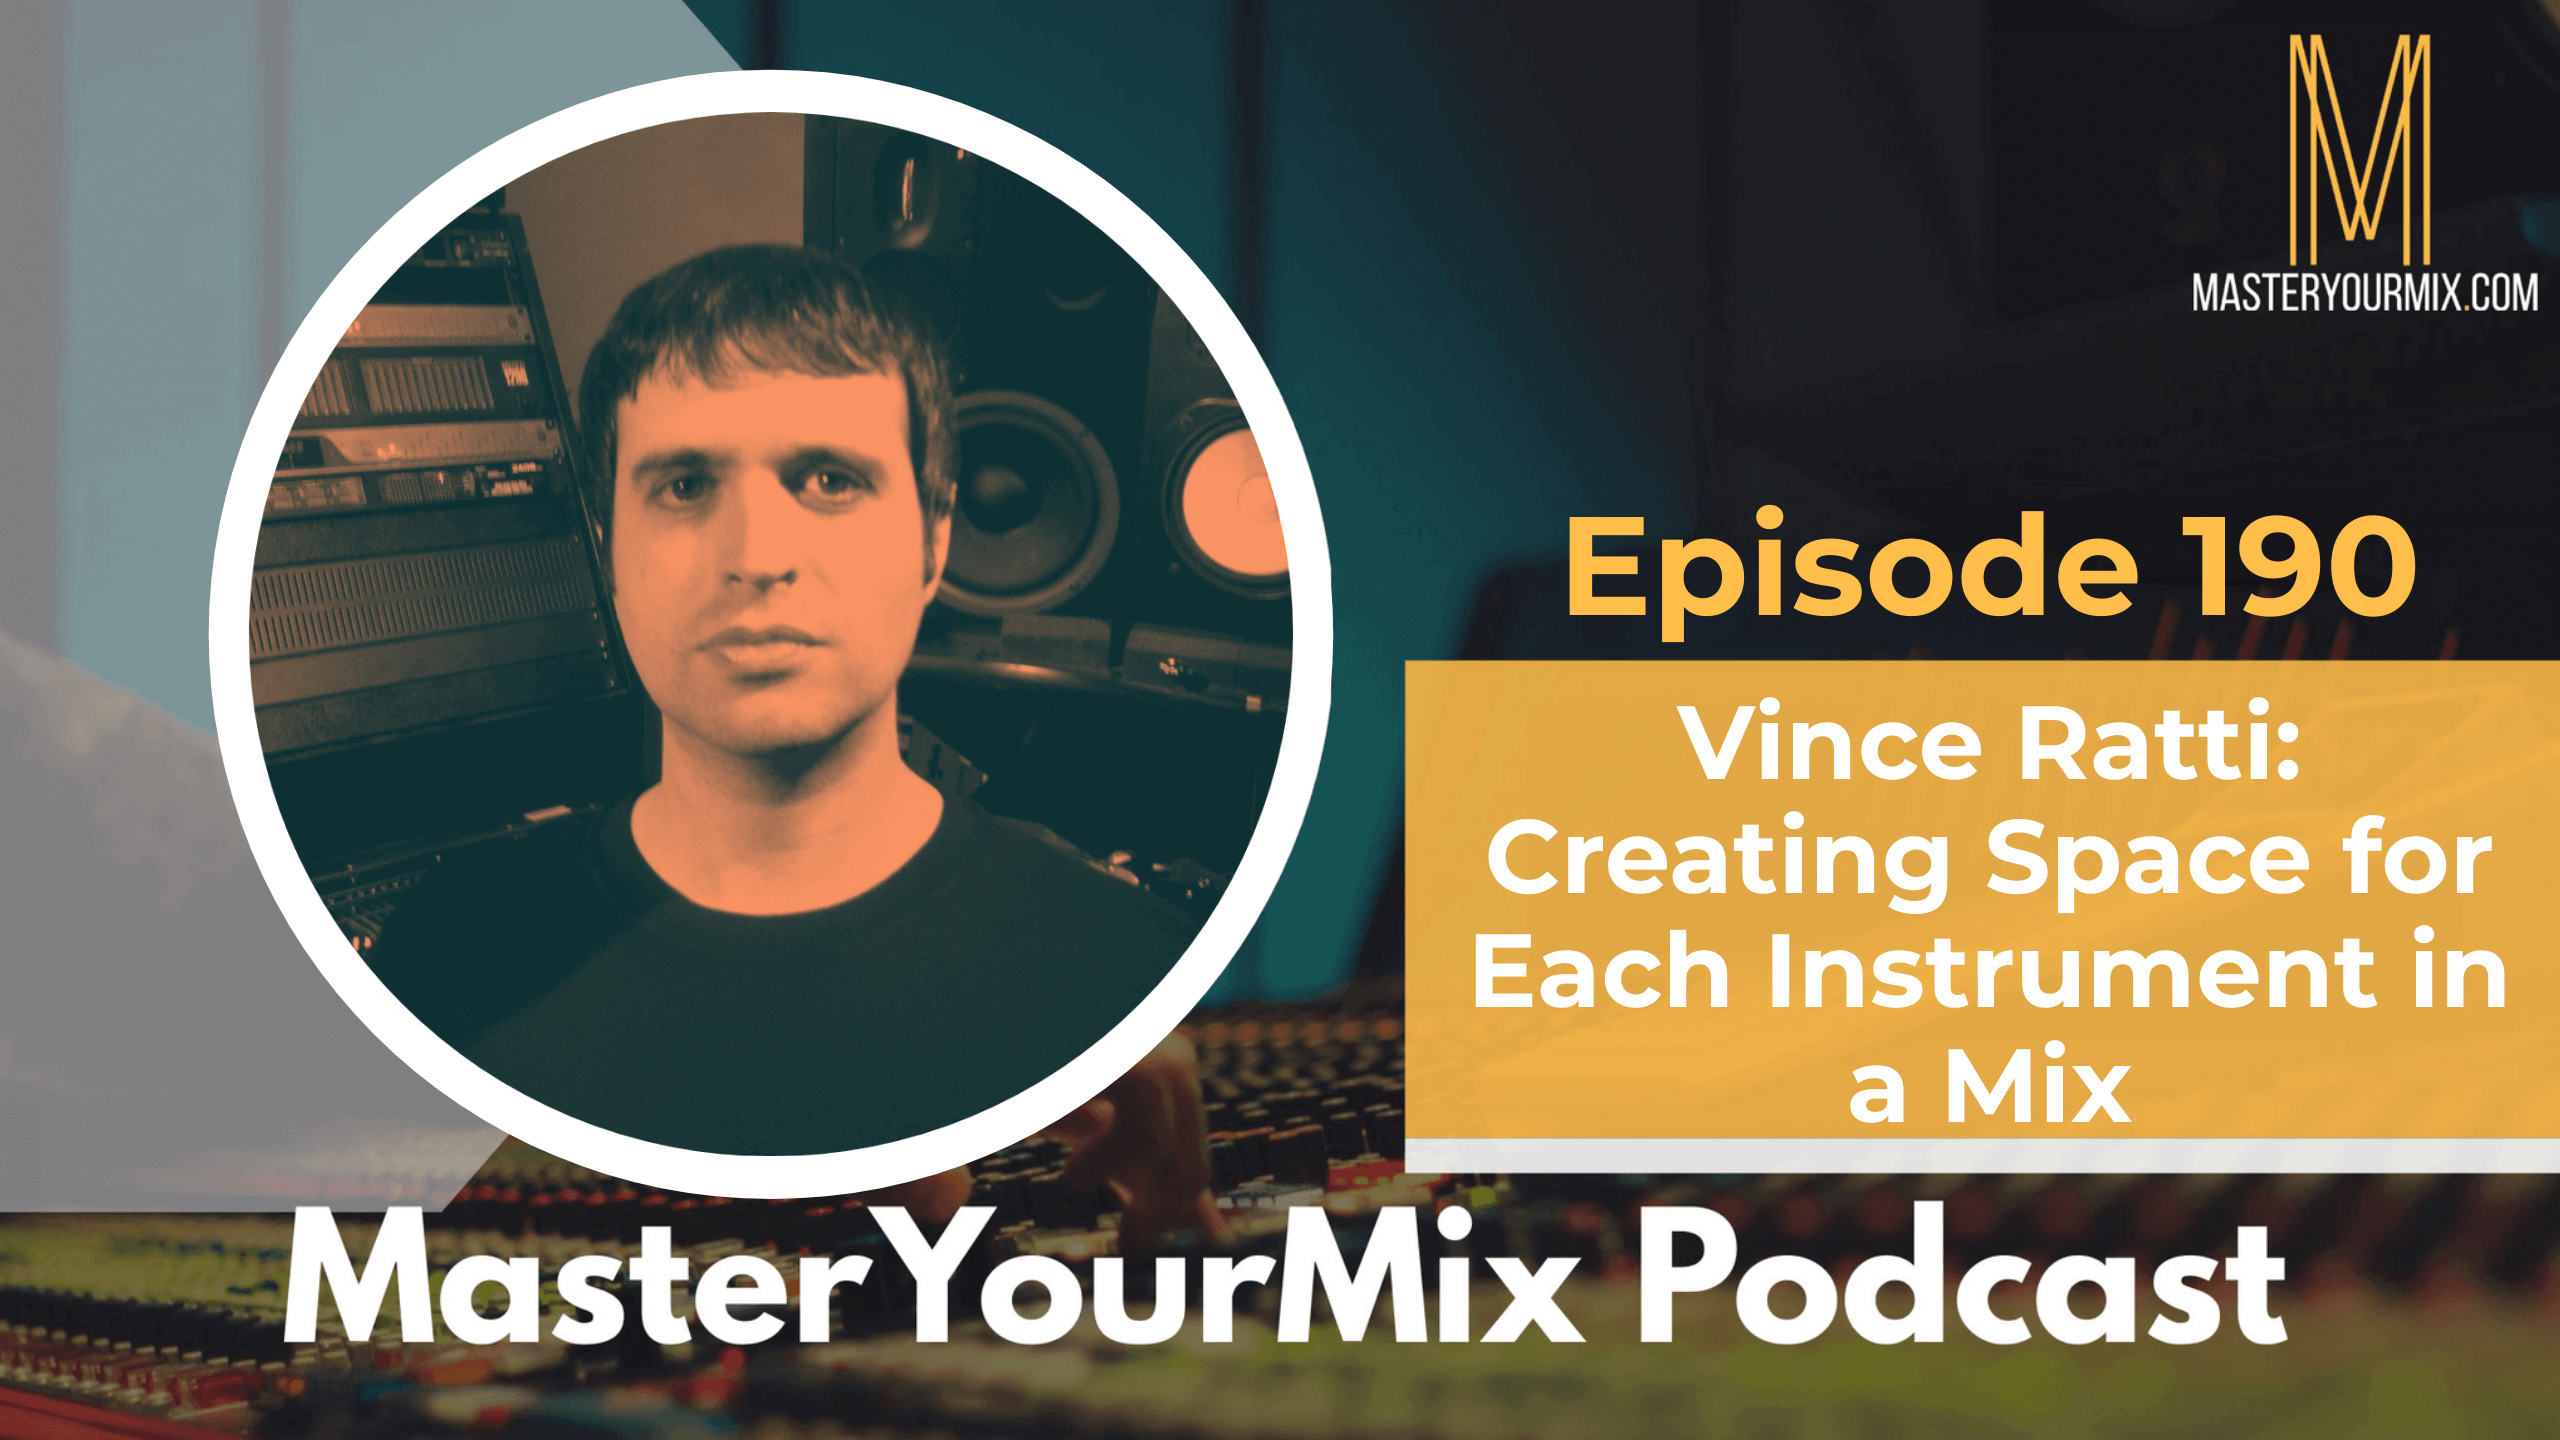 master your mix podcast, ep 190 vince ratti